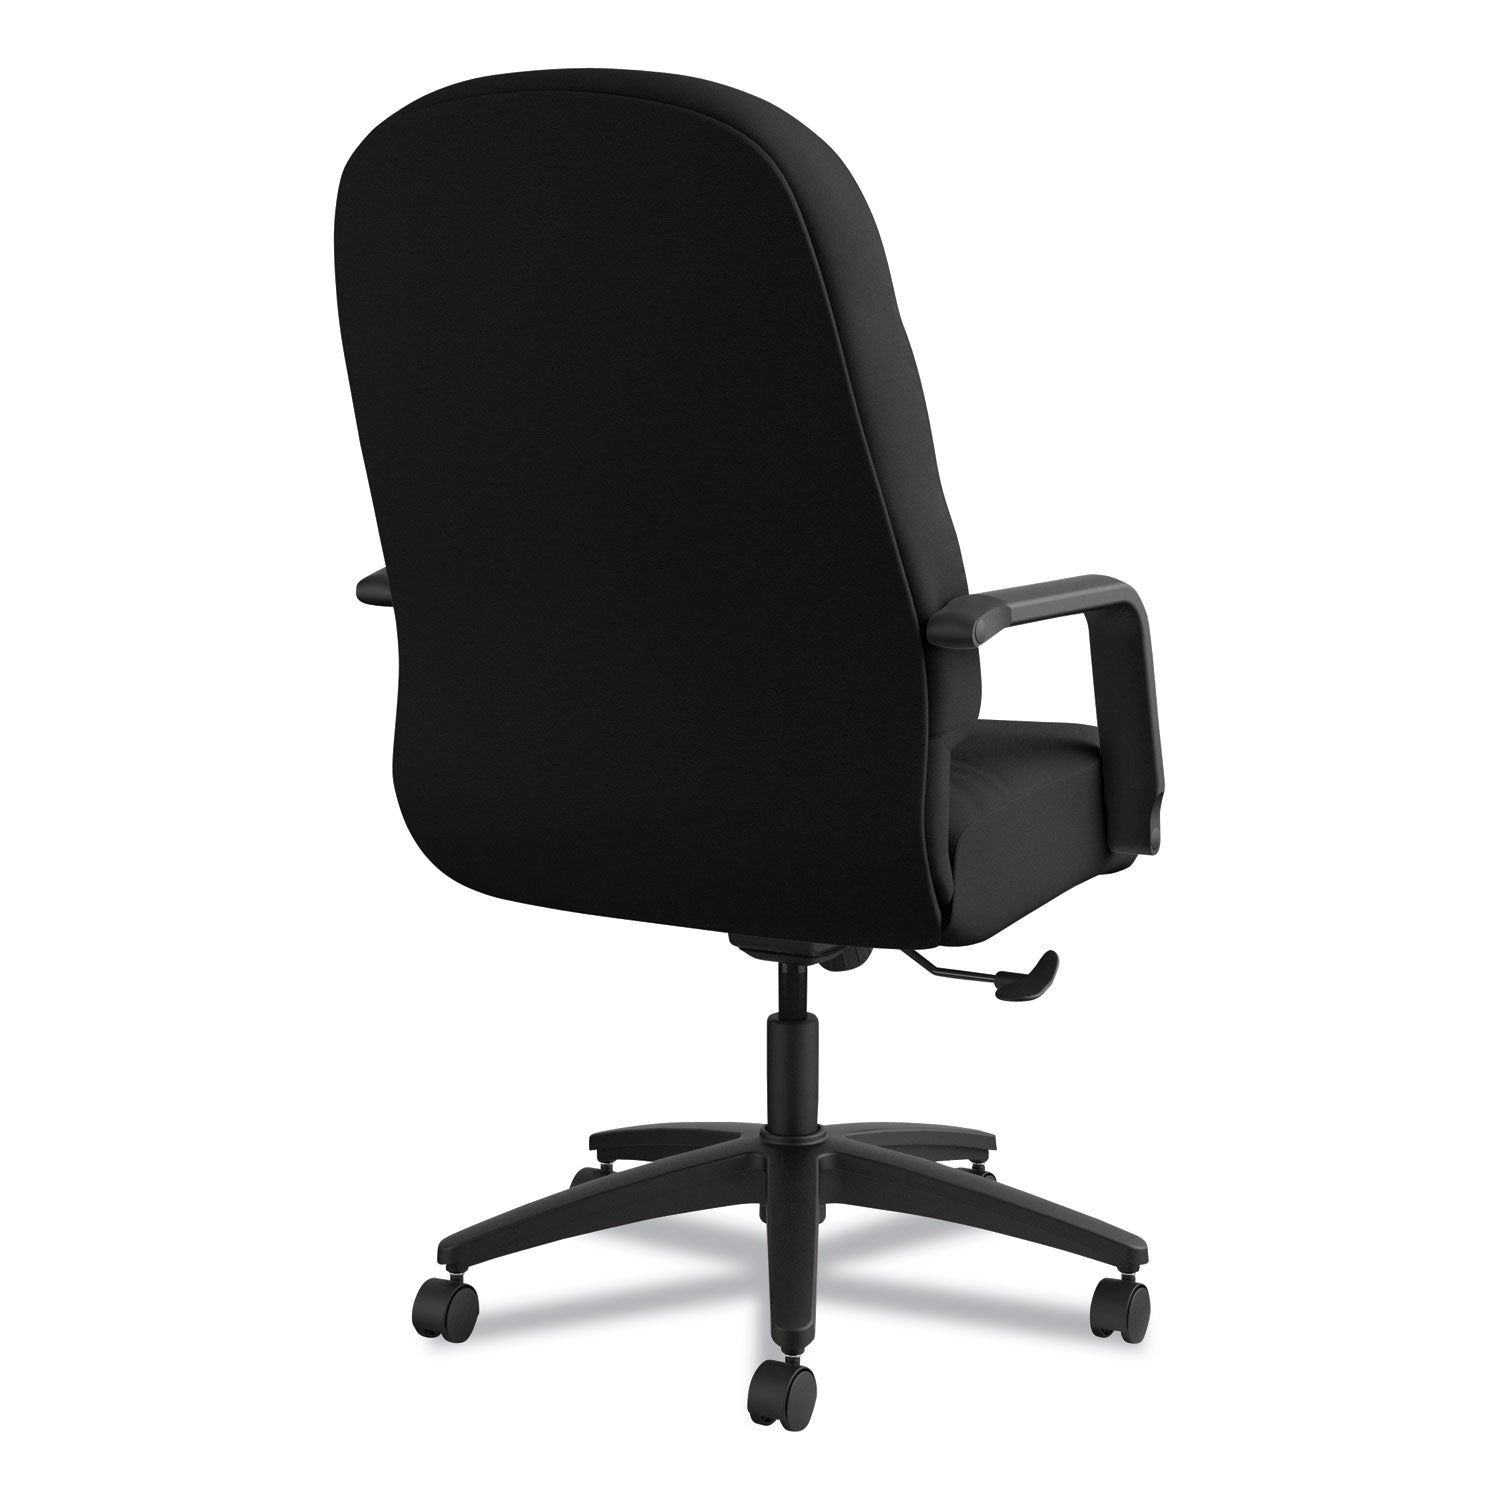 Pillow-Soft 2090 Series Executive High-Back Swivel/Tilt Chair, Supports Up to 300 lb, 17" to 21" Seat Height, Black - 6